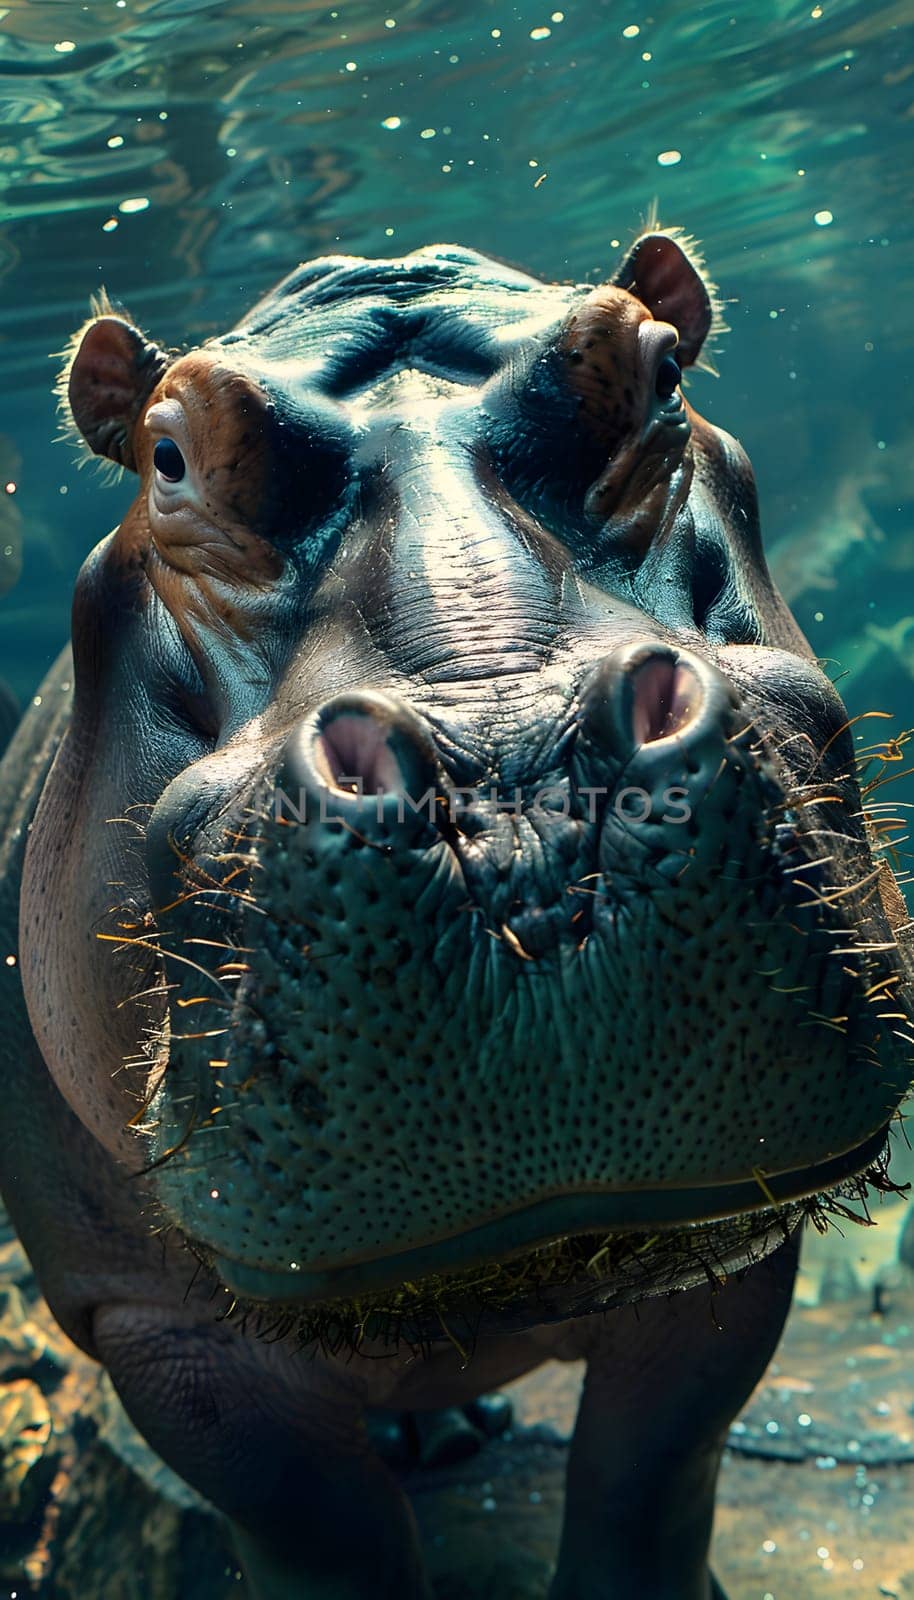 A hippopotamus with its eye on the camera is swimming in the water by Nadtochiy